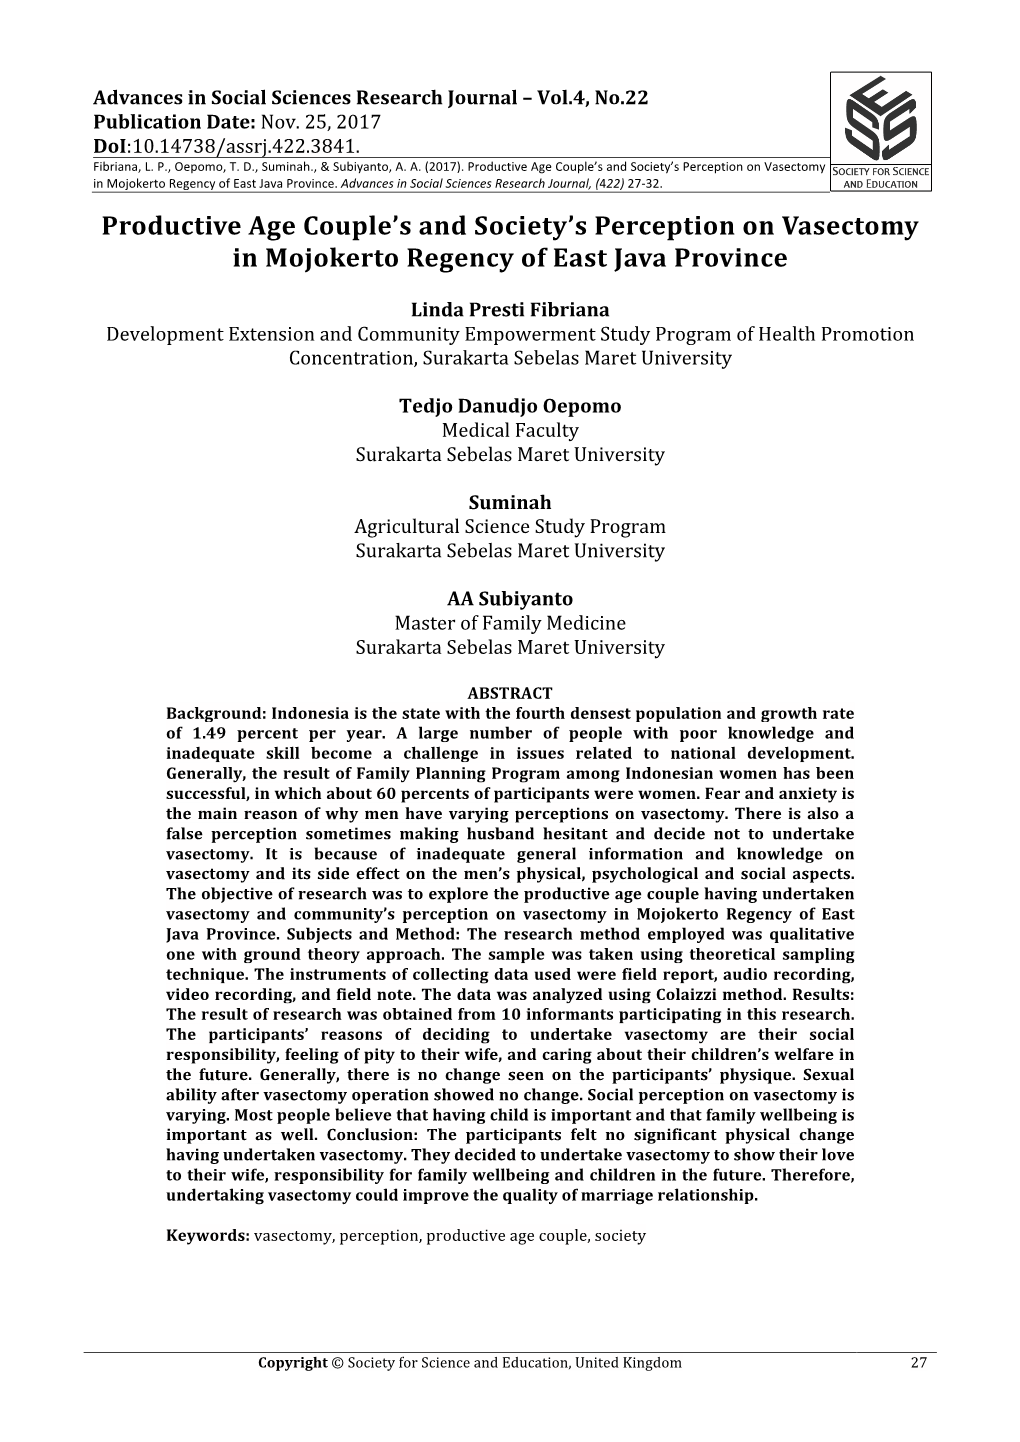 Productive Age Couple's and Society's Perception on Vasectomy in Mojokerto Regency of East Java Province